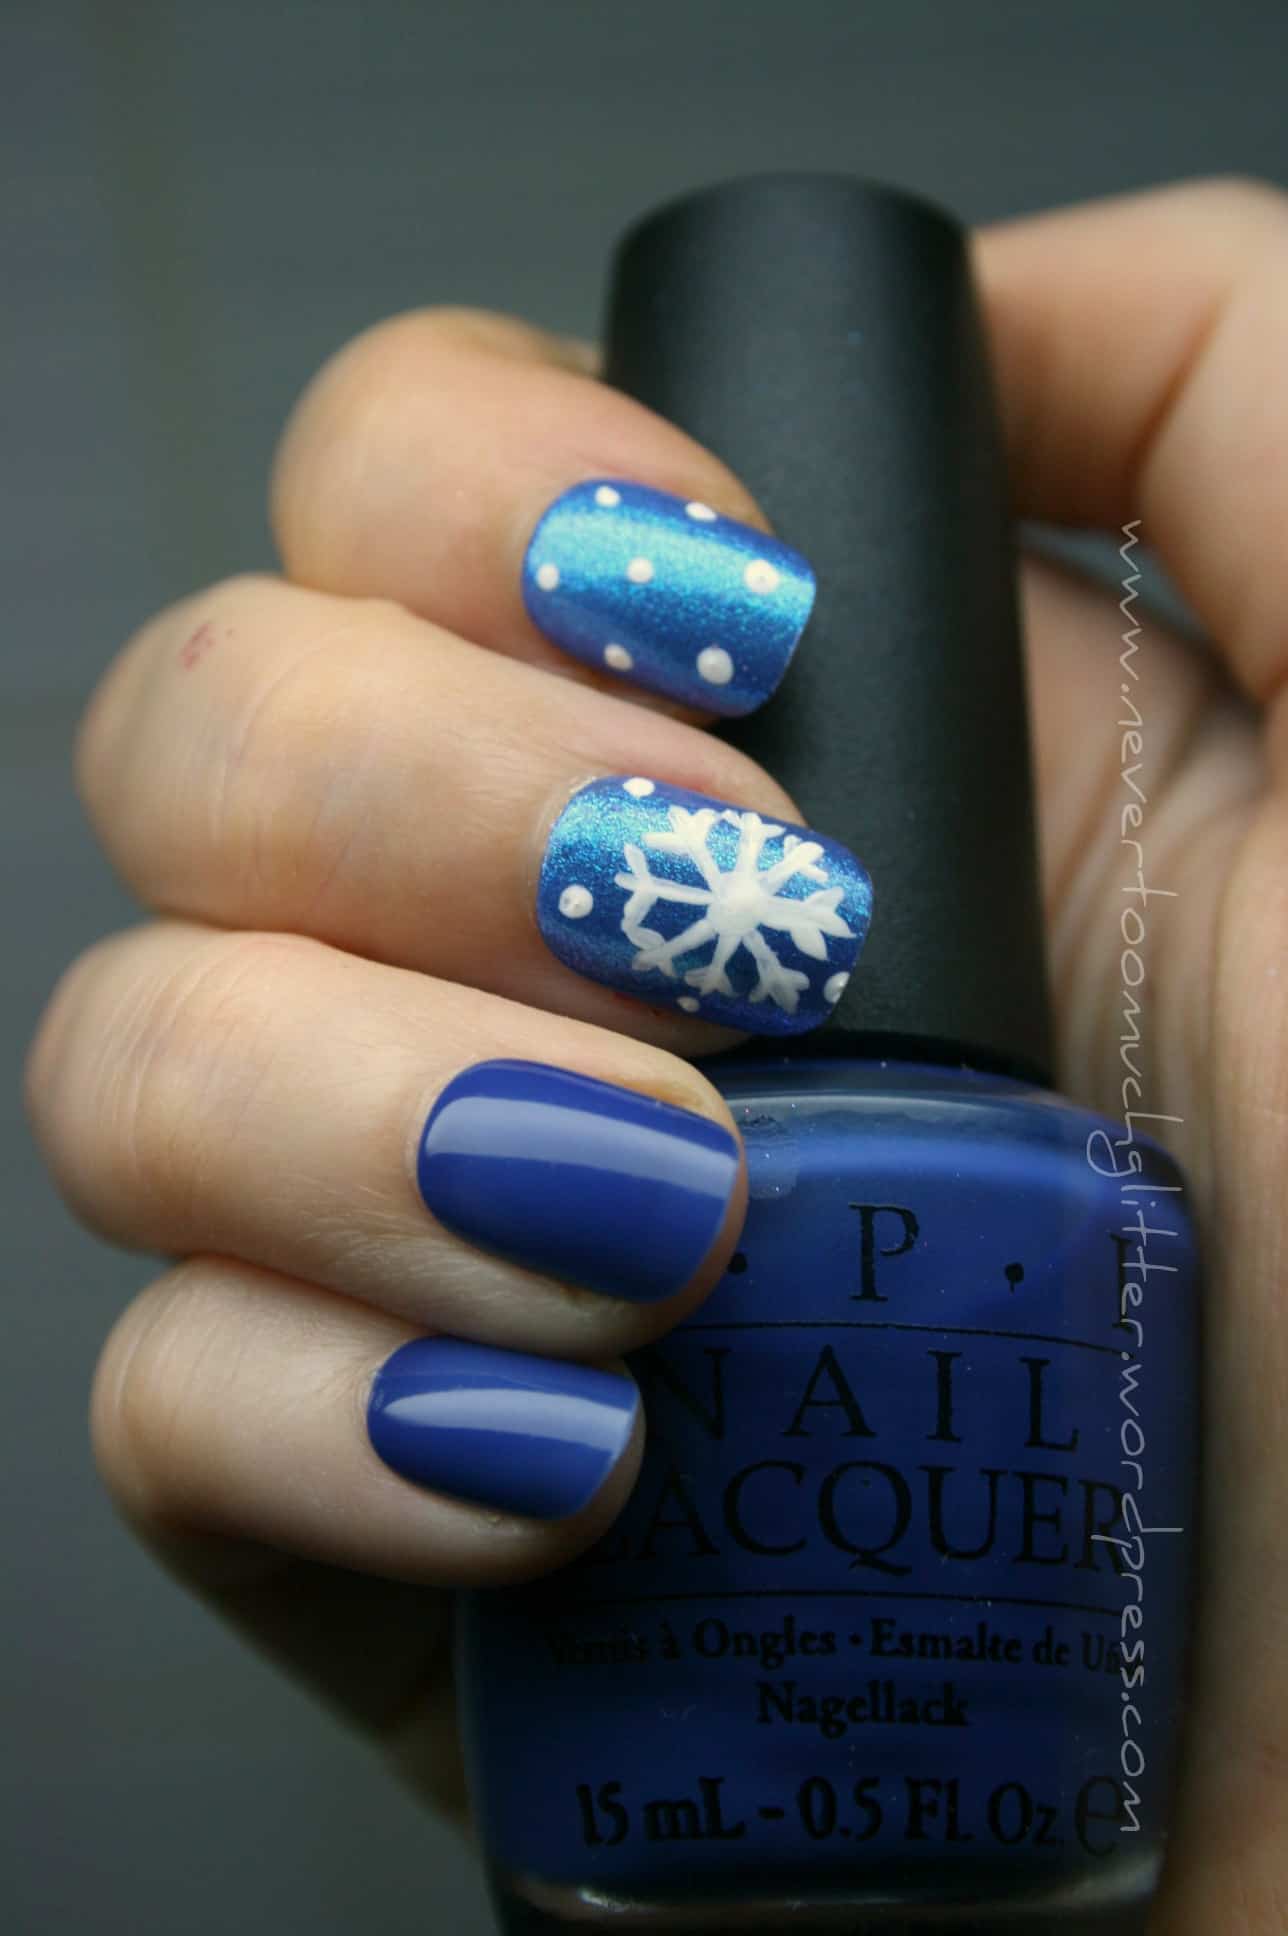 Deep blue with white dots and snowflakes